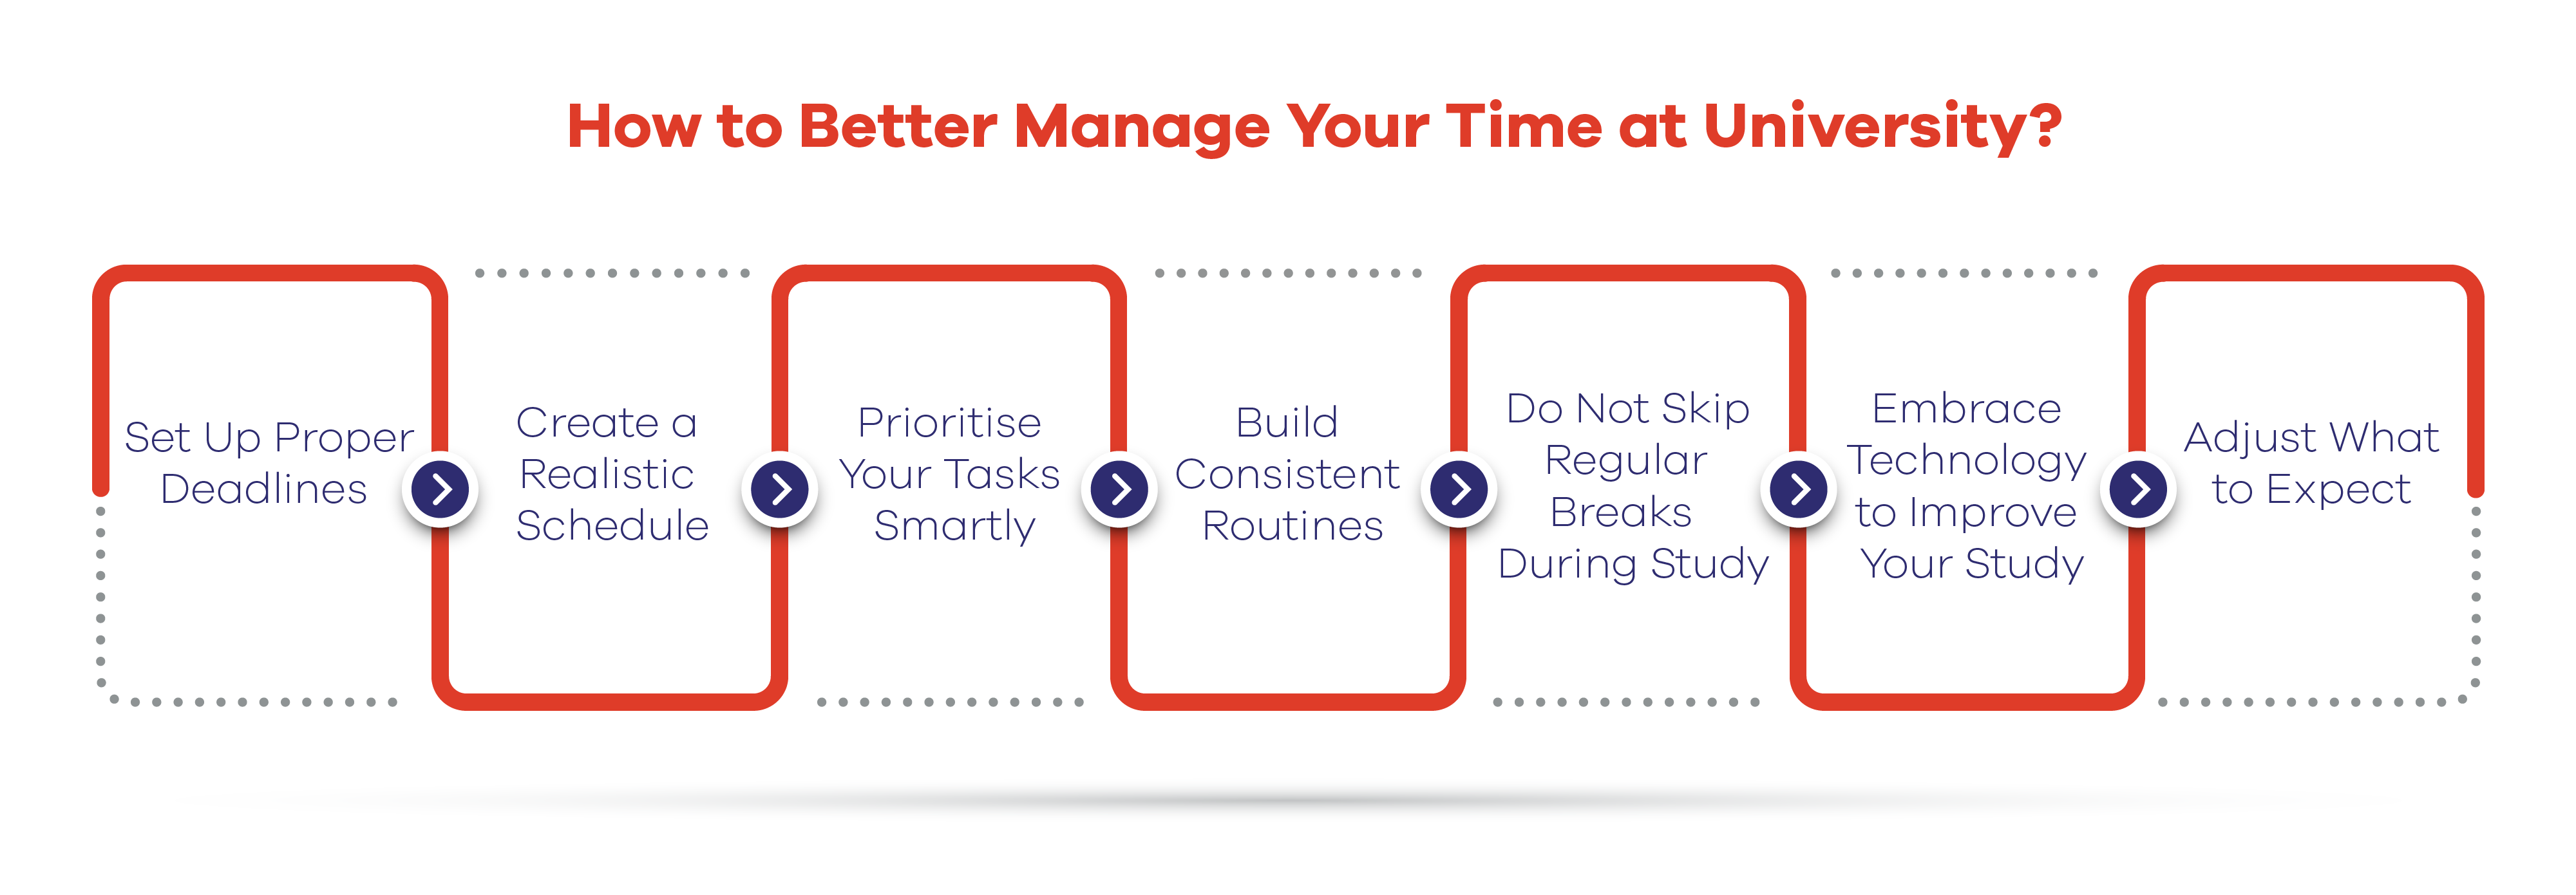 How to Better Manage Your Time at University? 